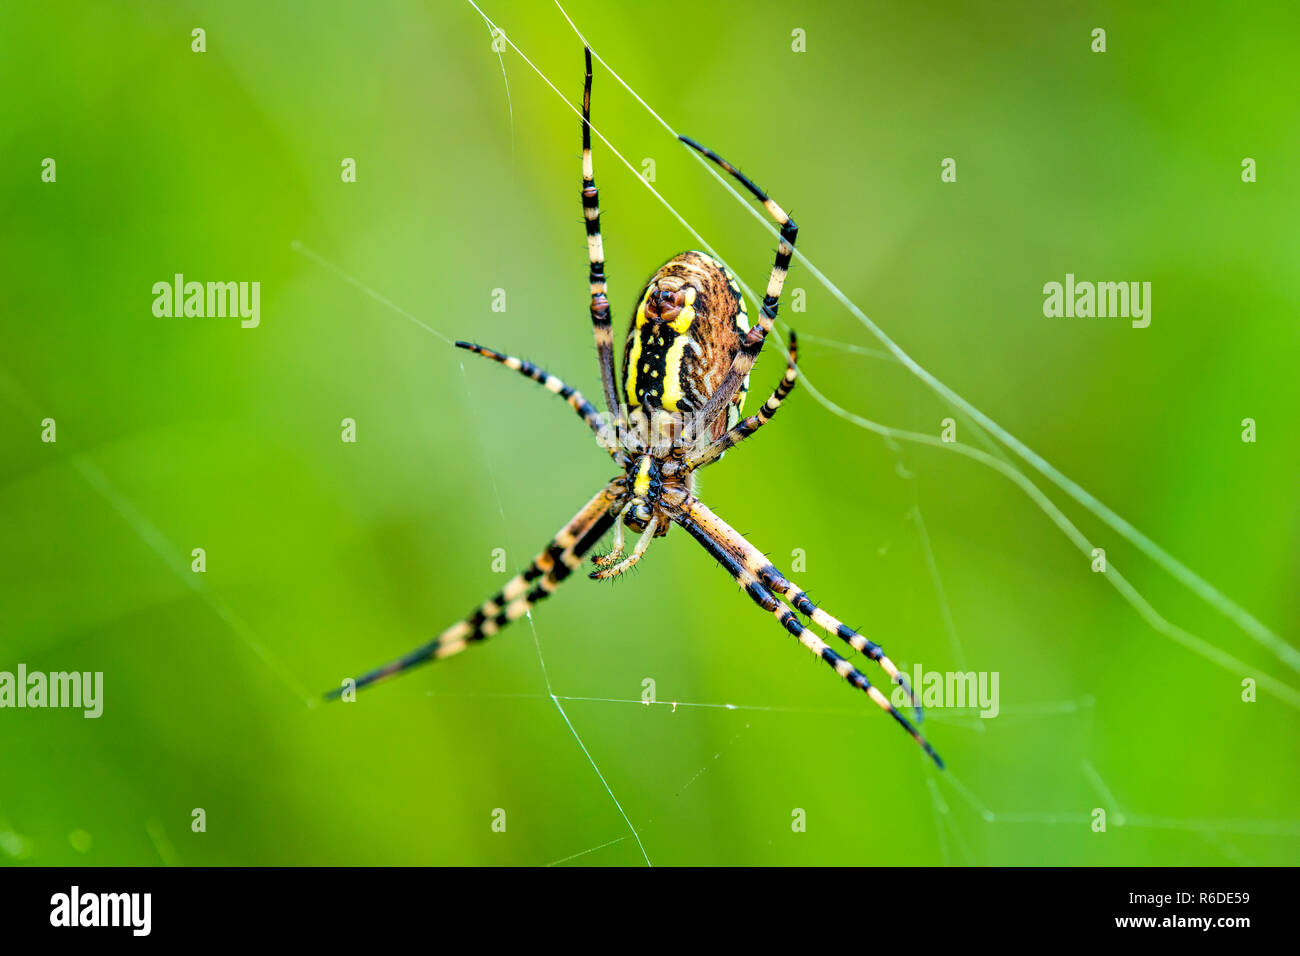 Wasp Spider, Male Spider In Its Web Stock Photo